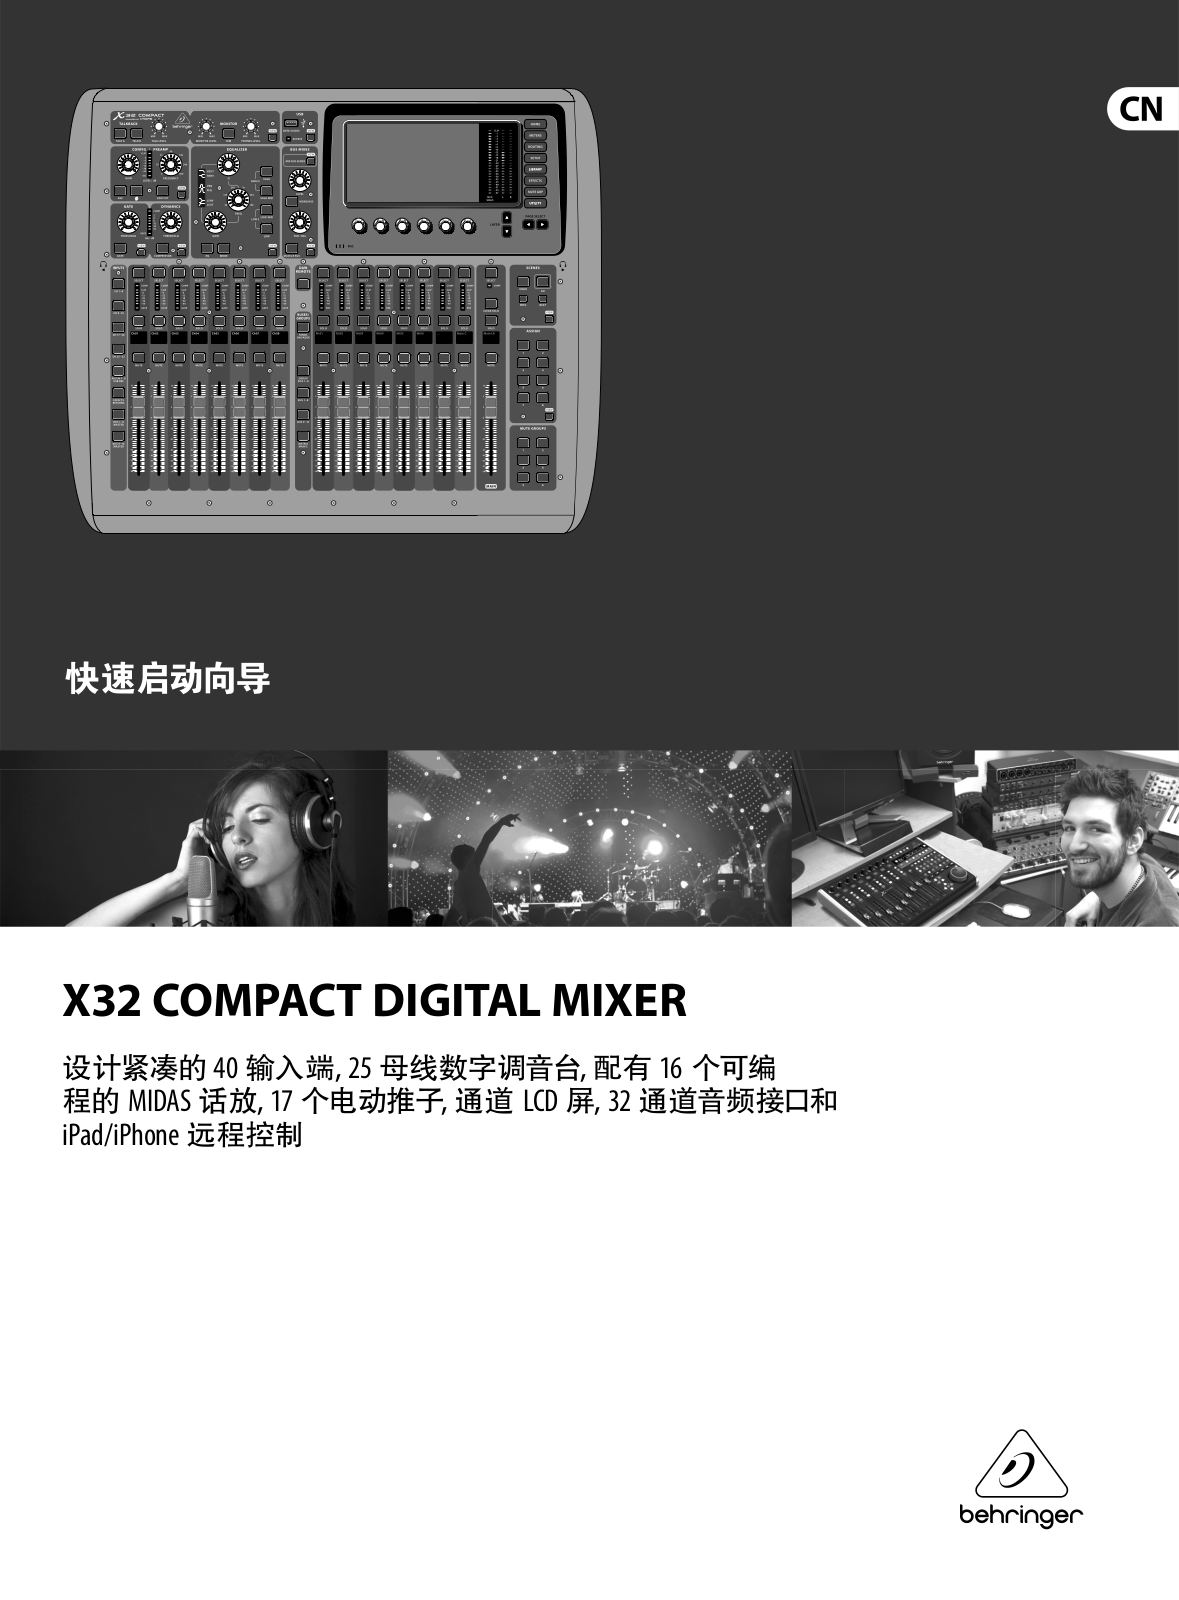 Behringer X32 COMPACT Quick Start Guide